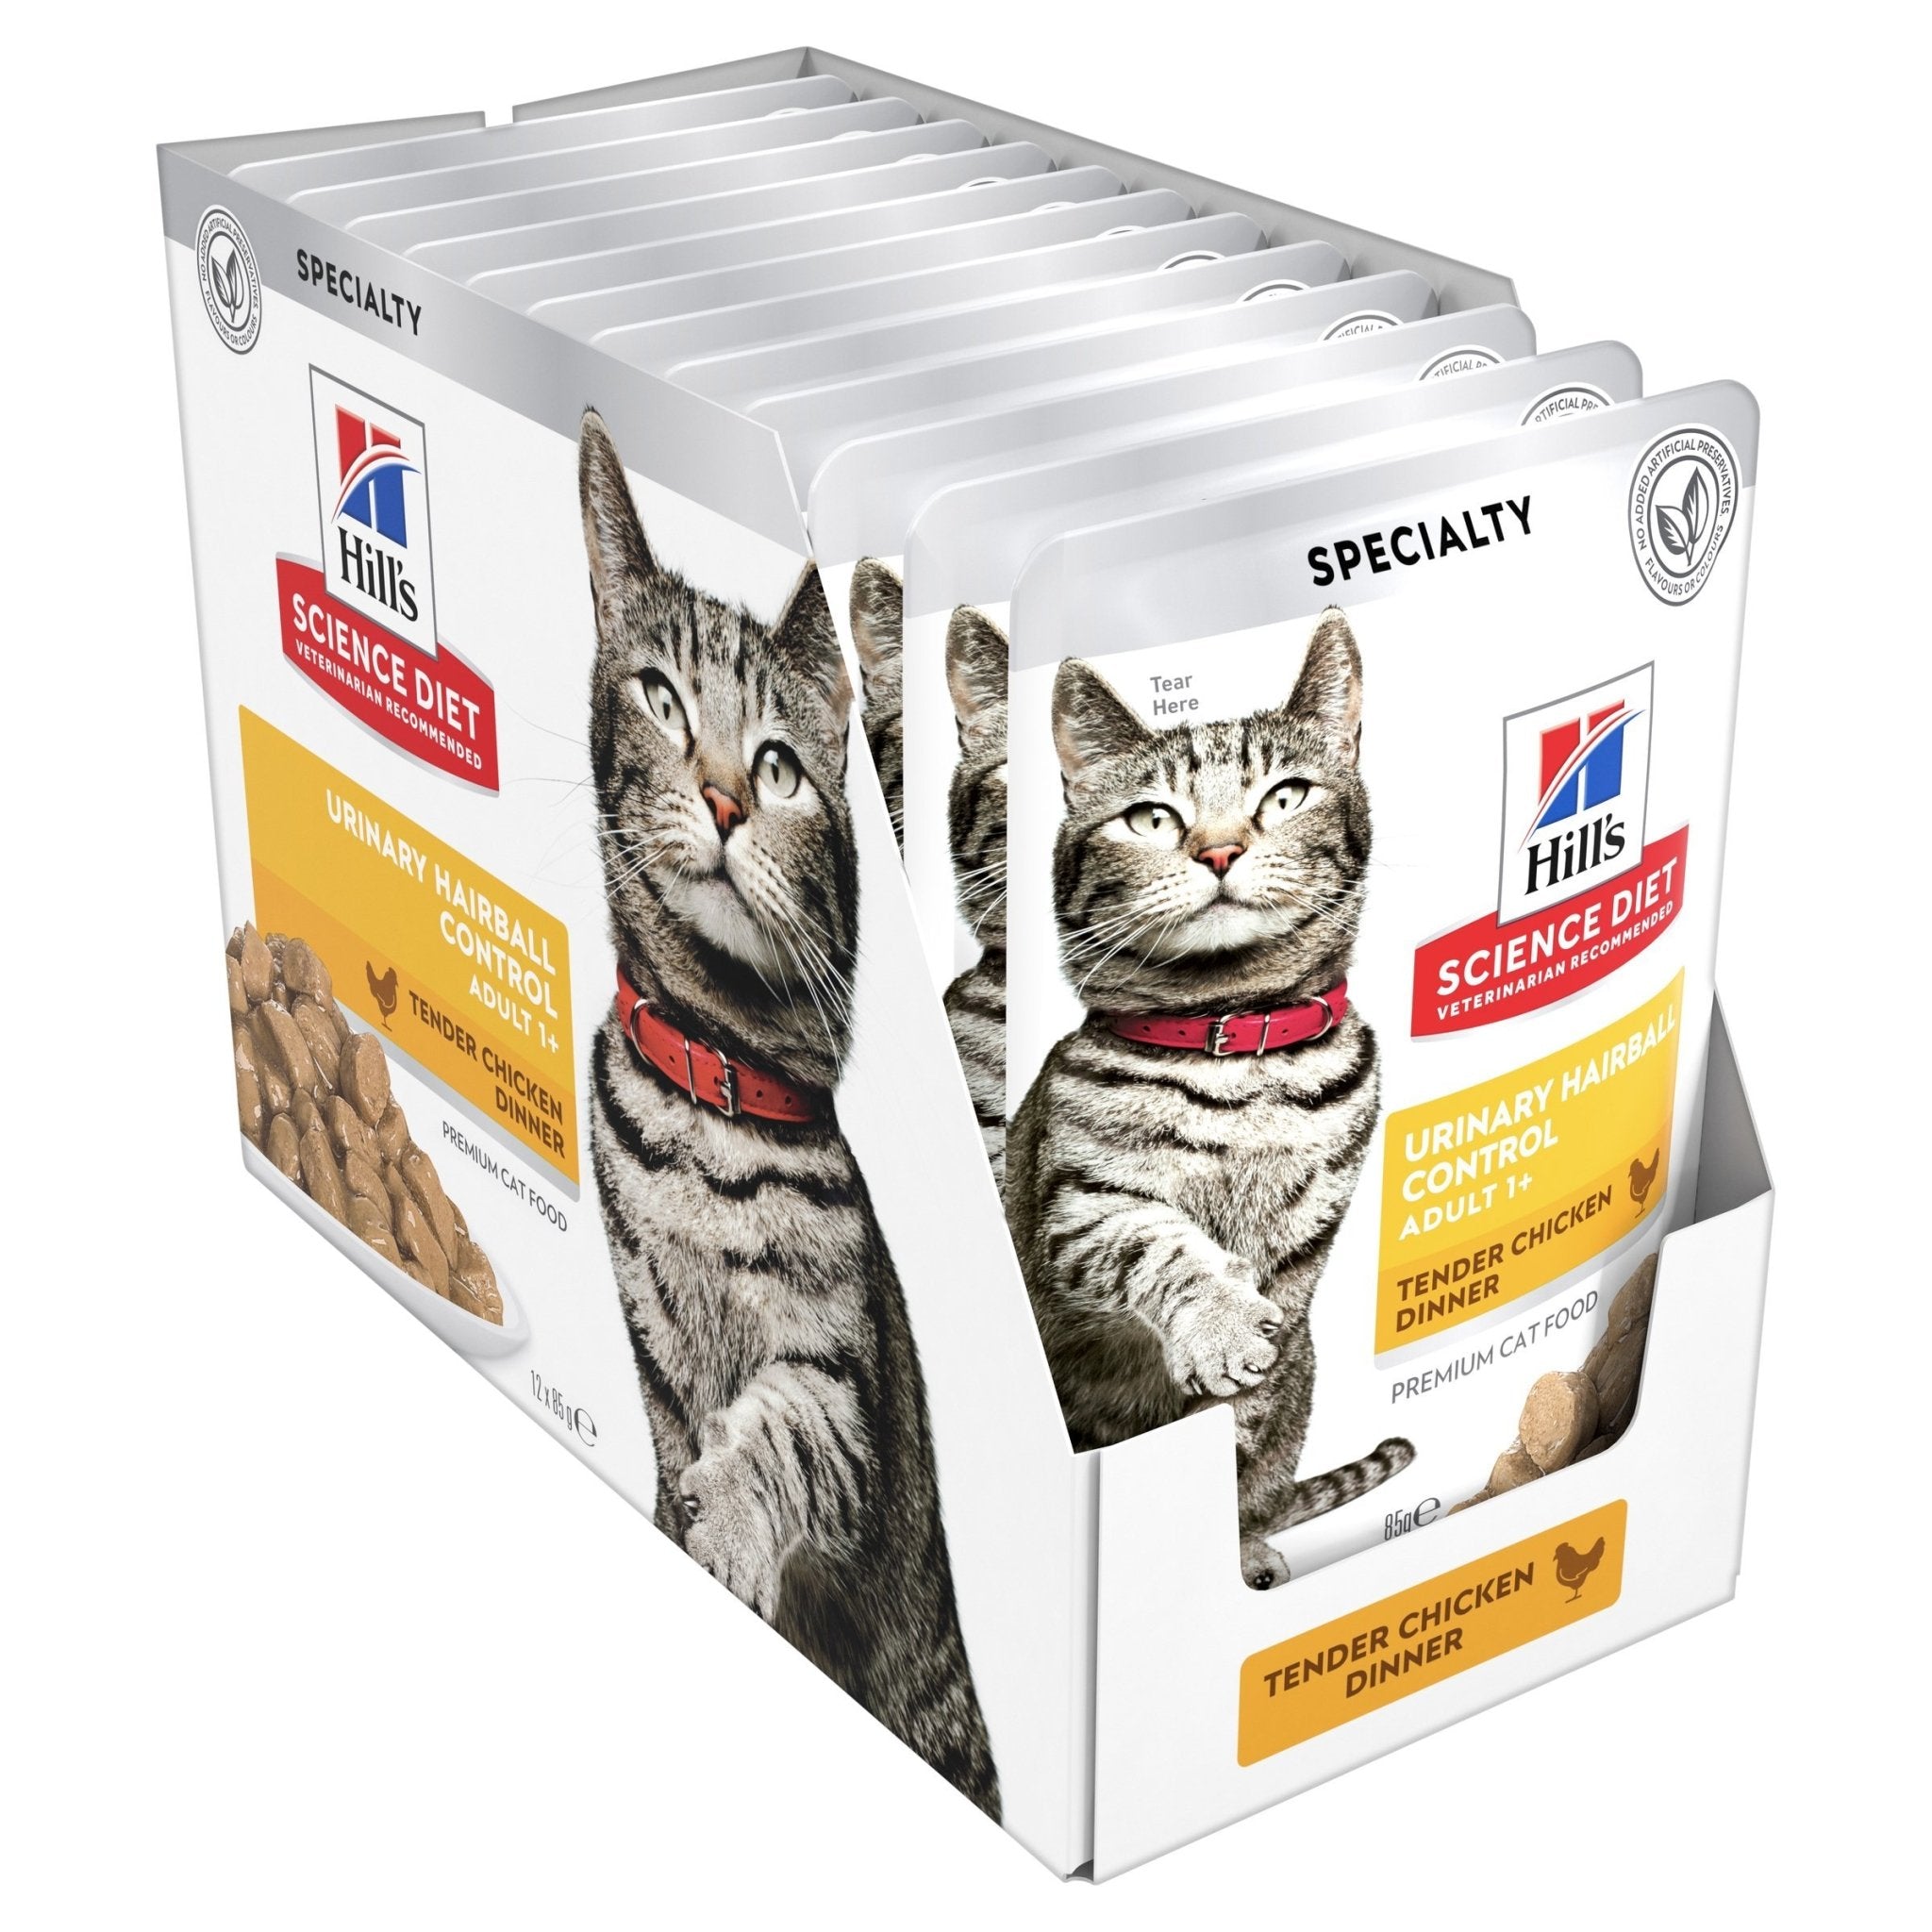 Hill's Science Diet Adult Urinary Hairball Control Chicken Cat Food Pouches 85g